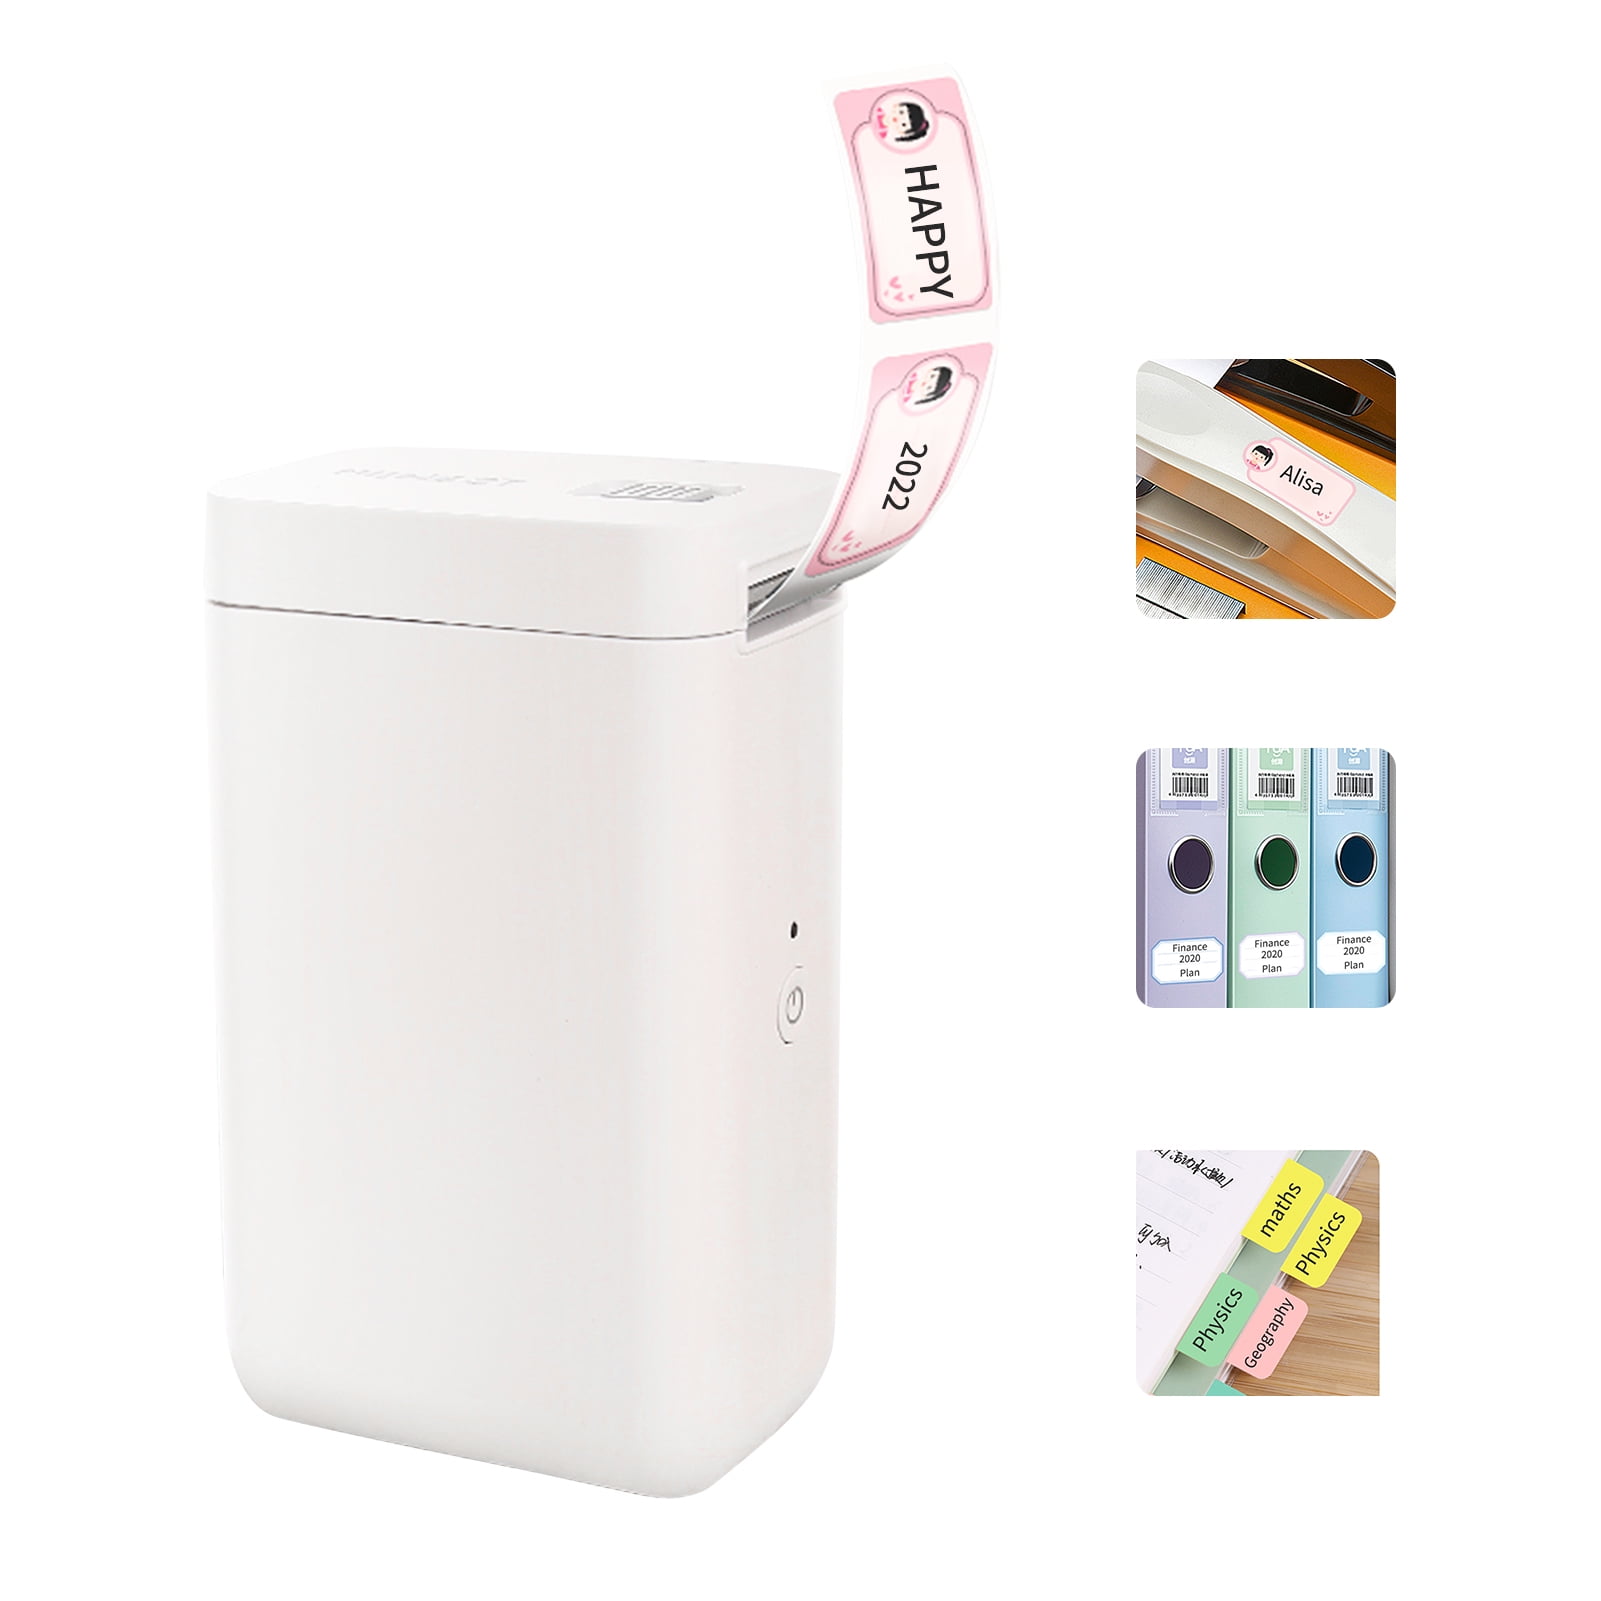 Niimbot D101 Label Maker Machine Mini Pocket Thermal Label Printer All in  One BT Connect Prince DIY Date Journal Study S 